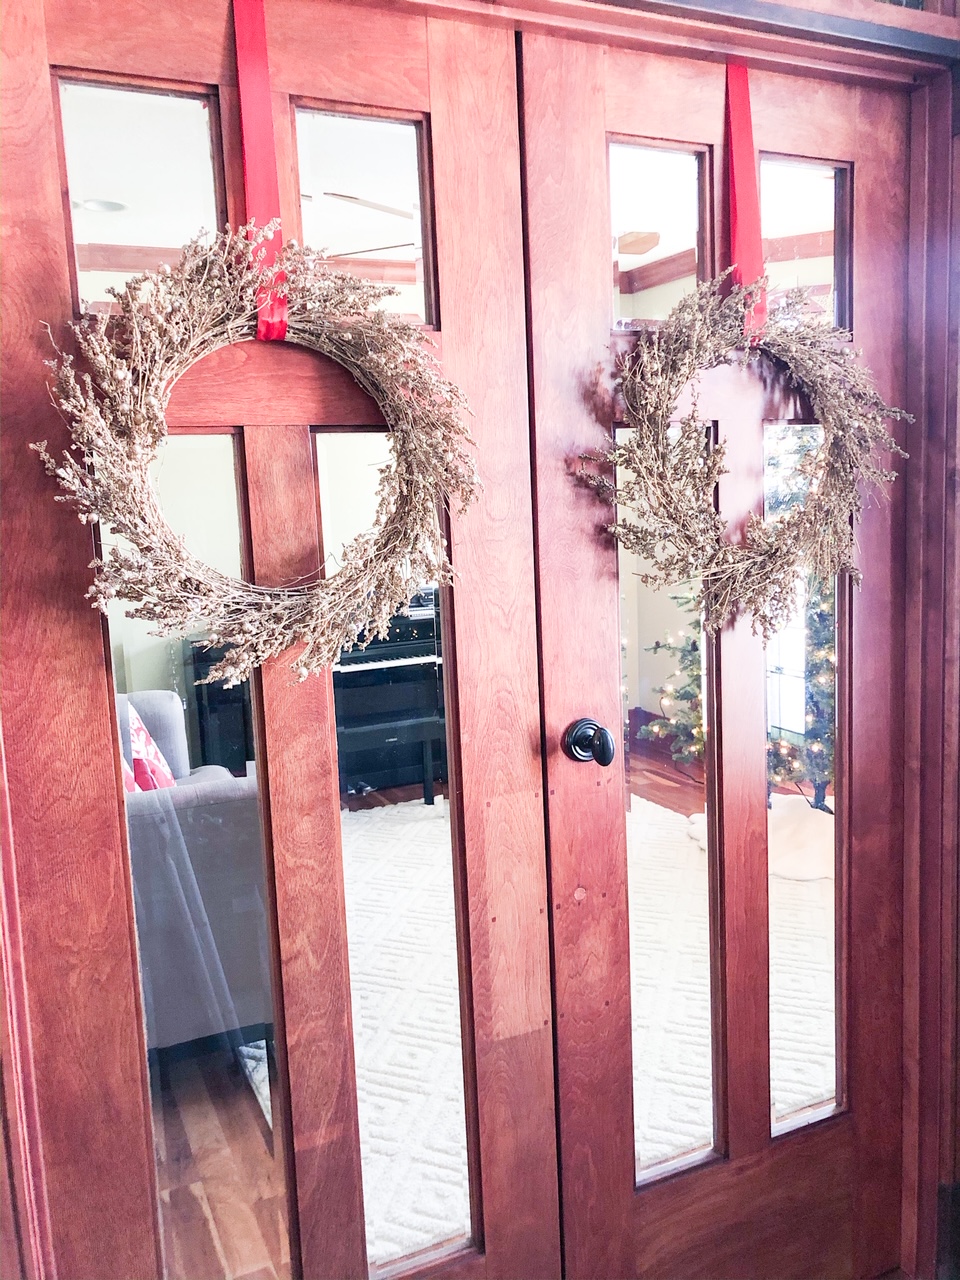 The Best Wreath Hanging Hack Without Damaging Your Door - Truly Kate